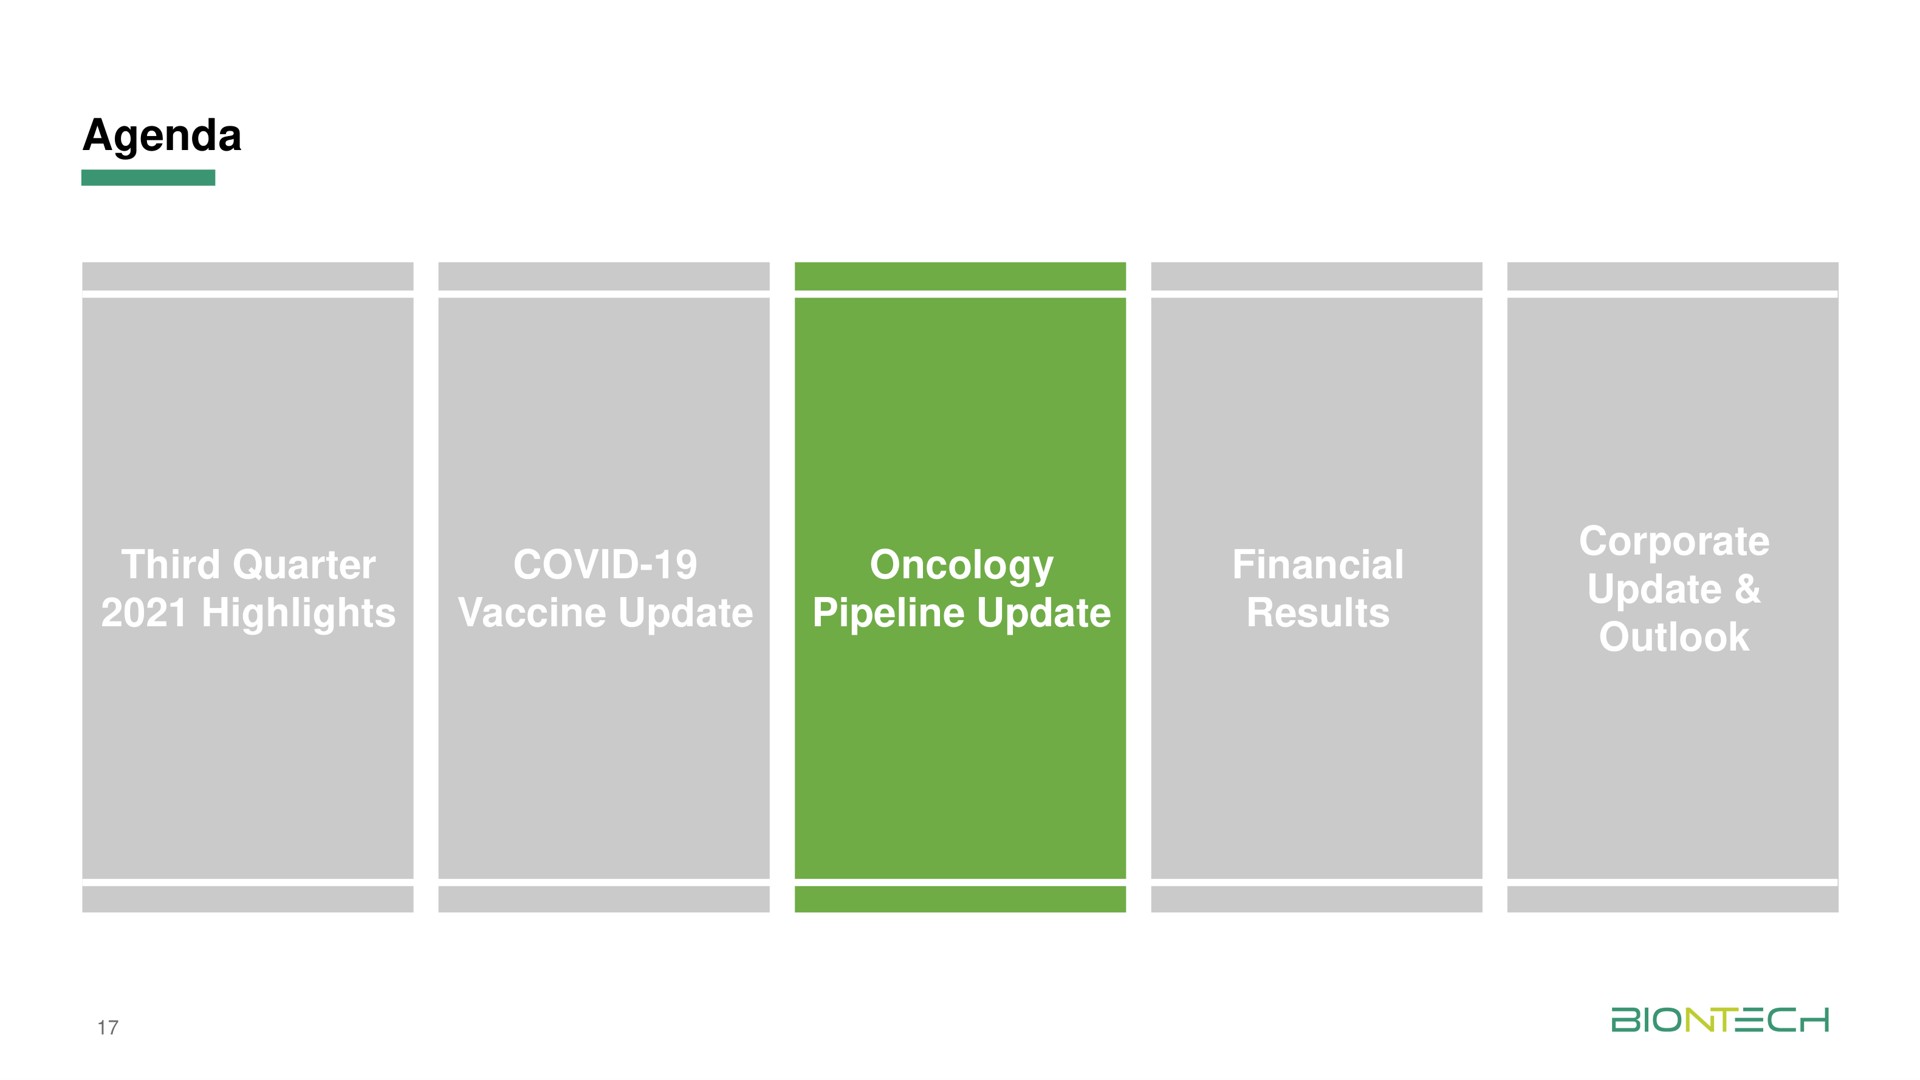 agenda third quarter highlights covid vaccine update oncology pipeline update financial results corporate update outlook | BioNTech